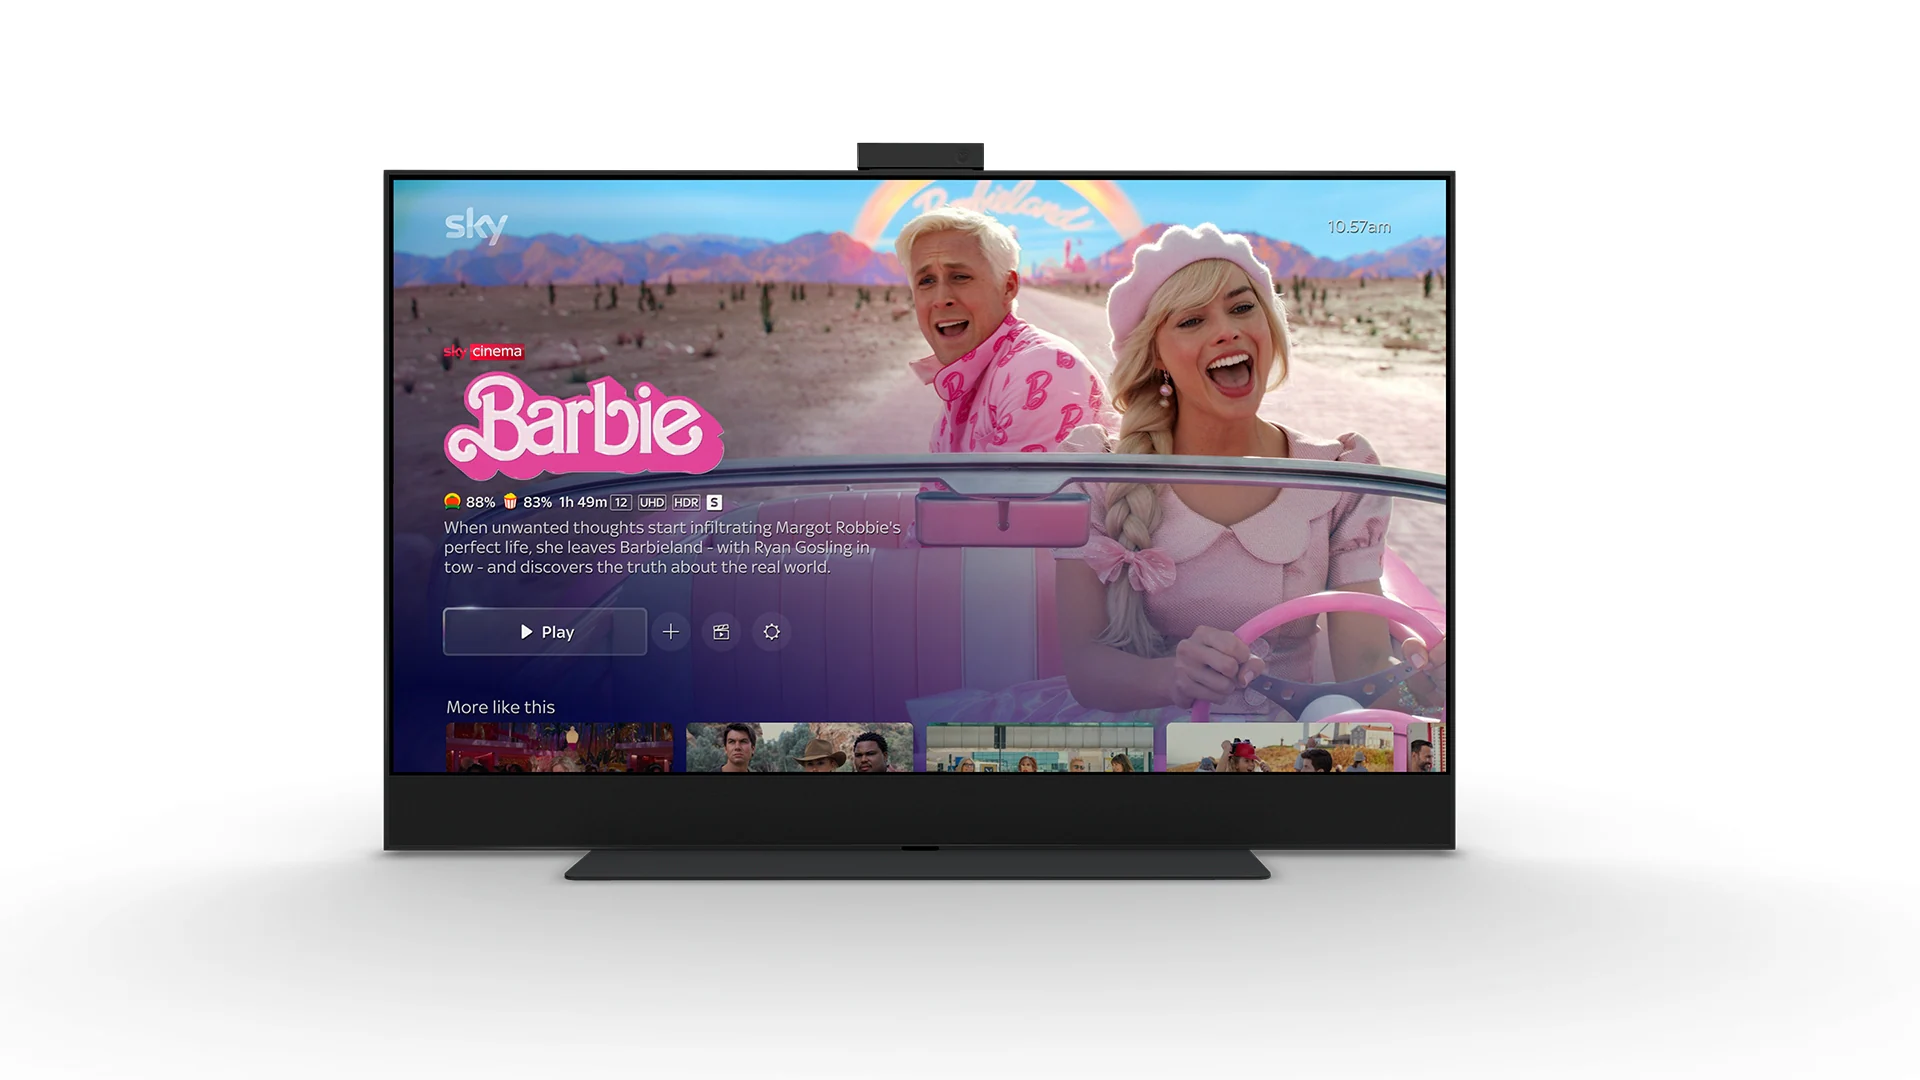 Entertainment OS on Sky keeps getting smarter thanks to clever new features: